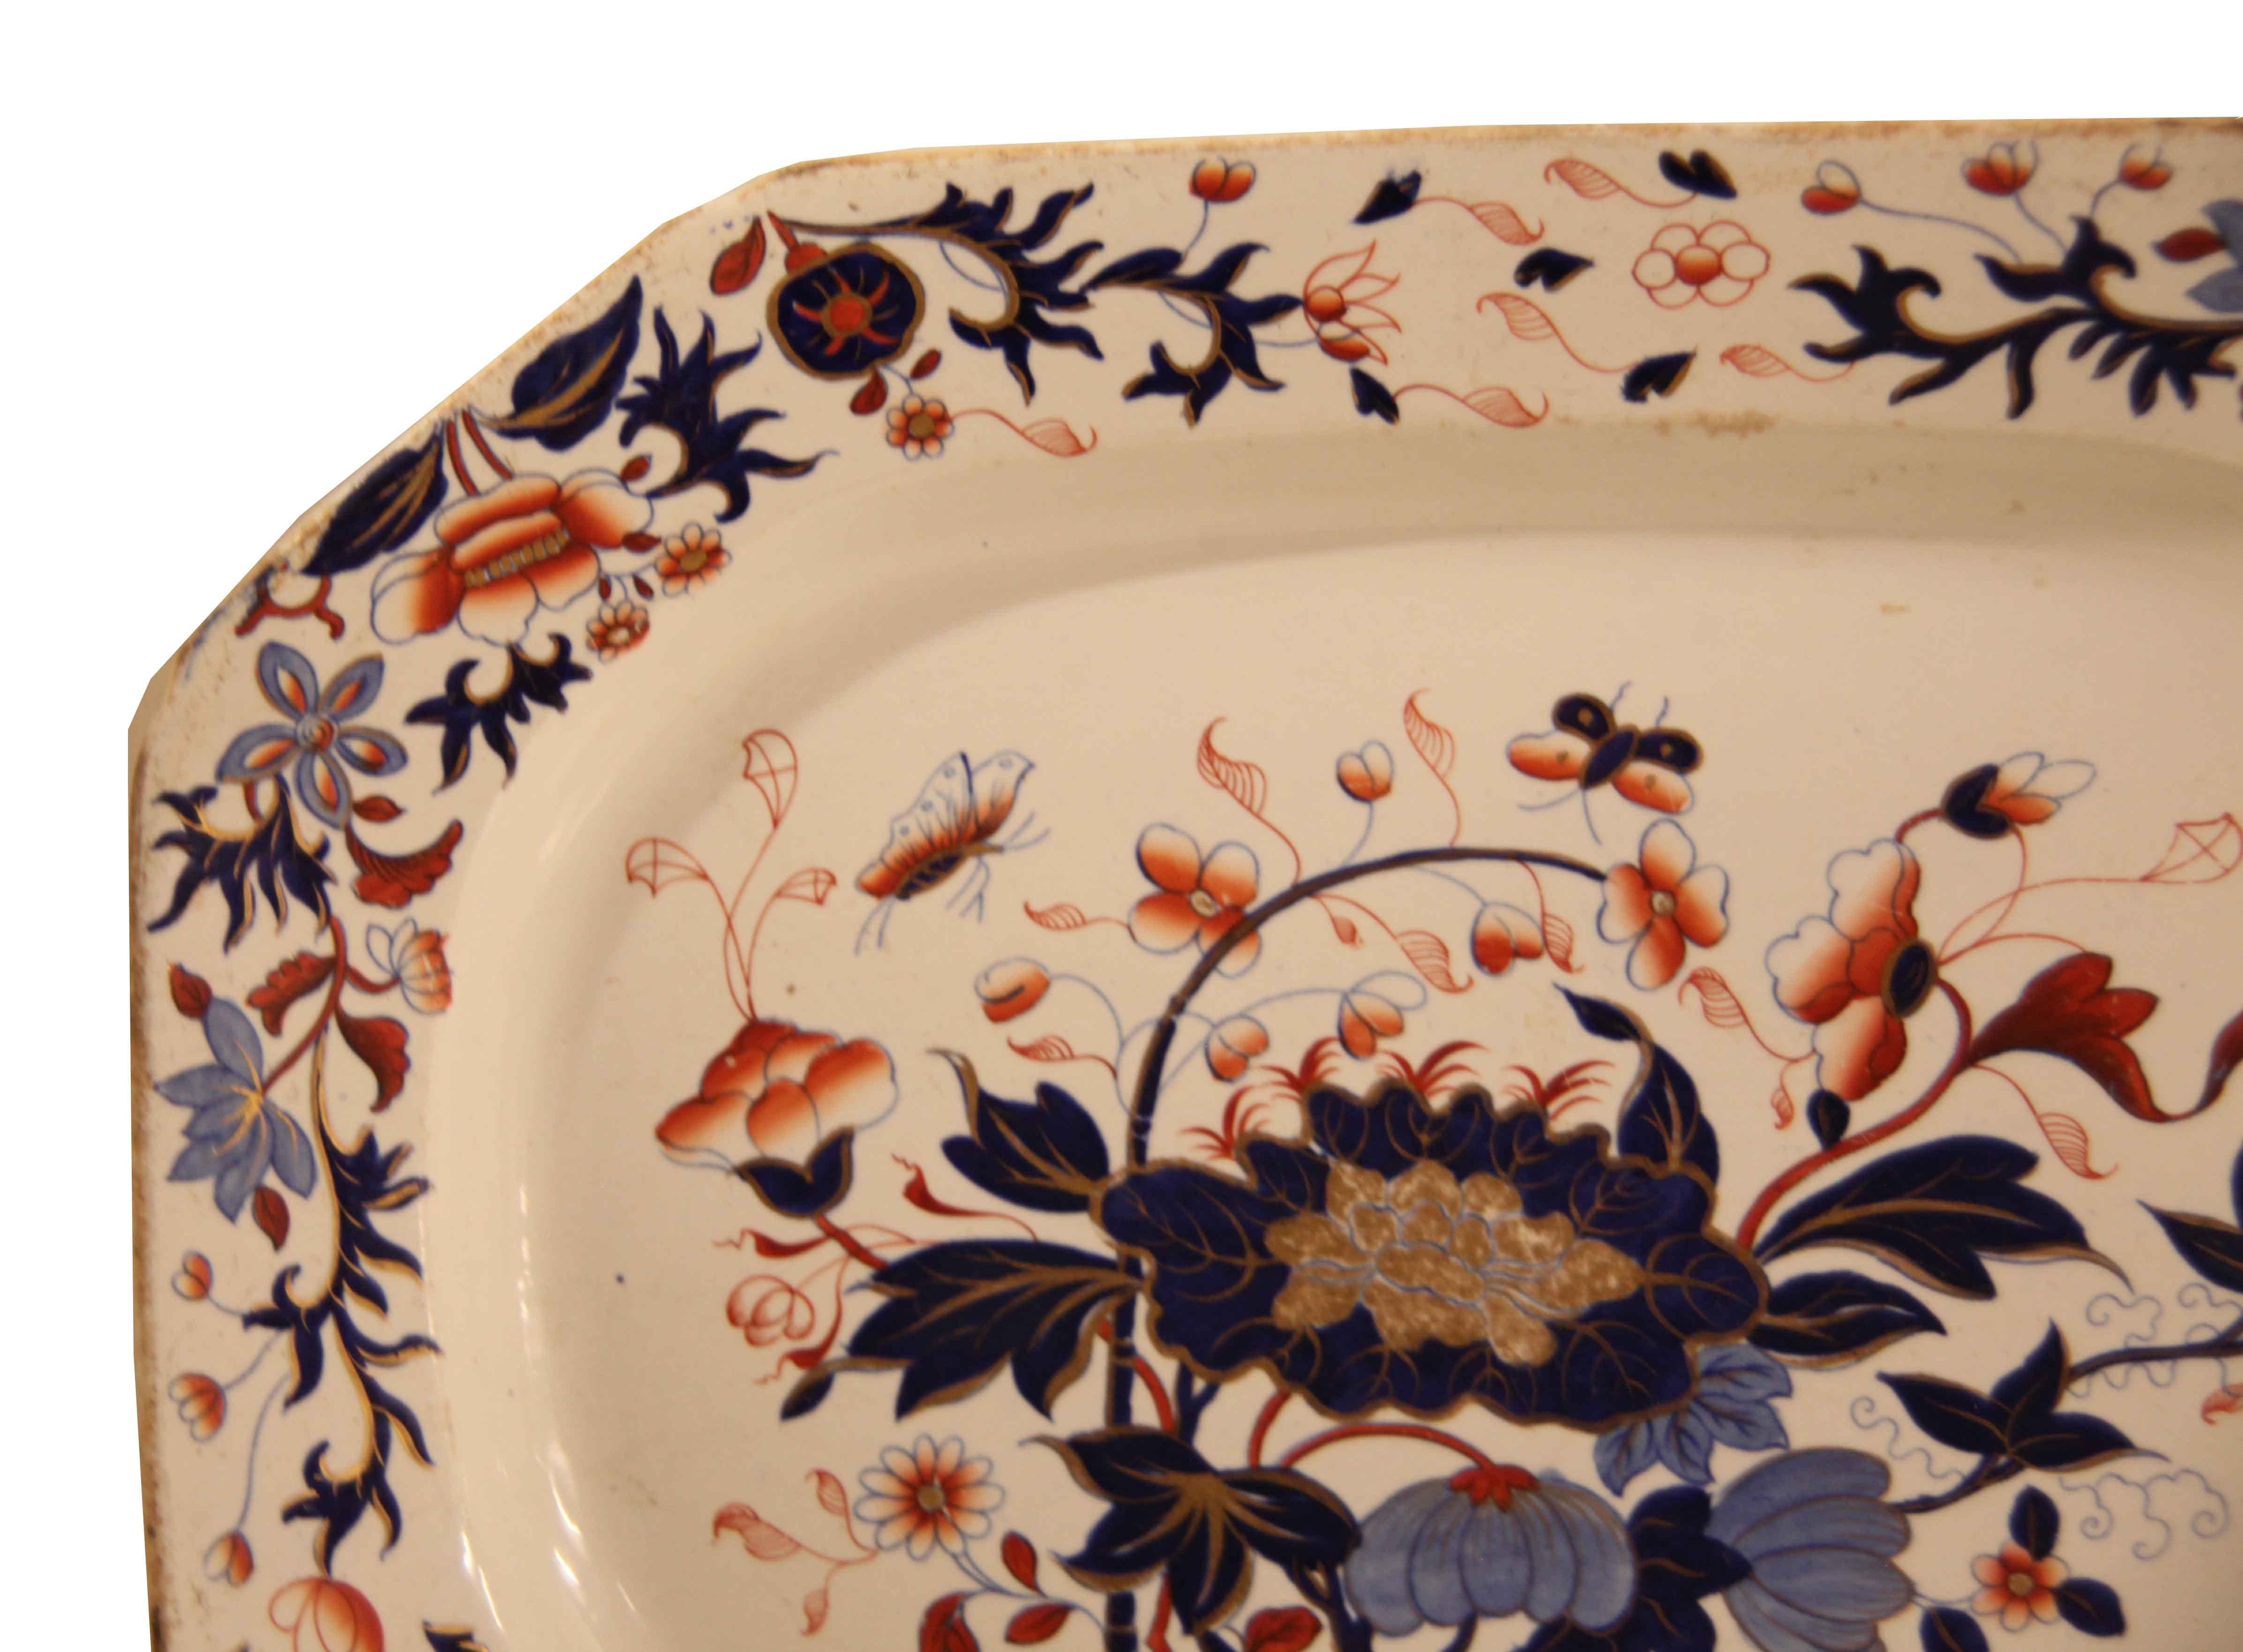 English Spode Ironstone Platter, this platter has an octagonal shape with a slight ''pinch'' at each angle point. The border features a repeating pattern of flowers and foliate with various shades of orange, coral, cobalt, brown, and light blue